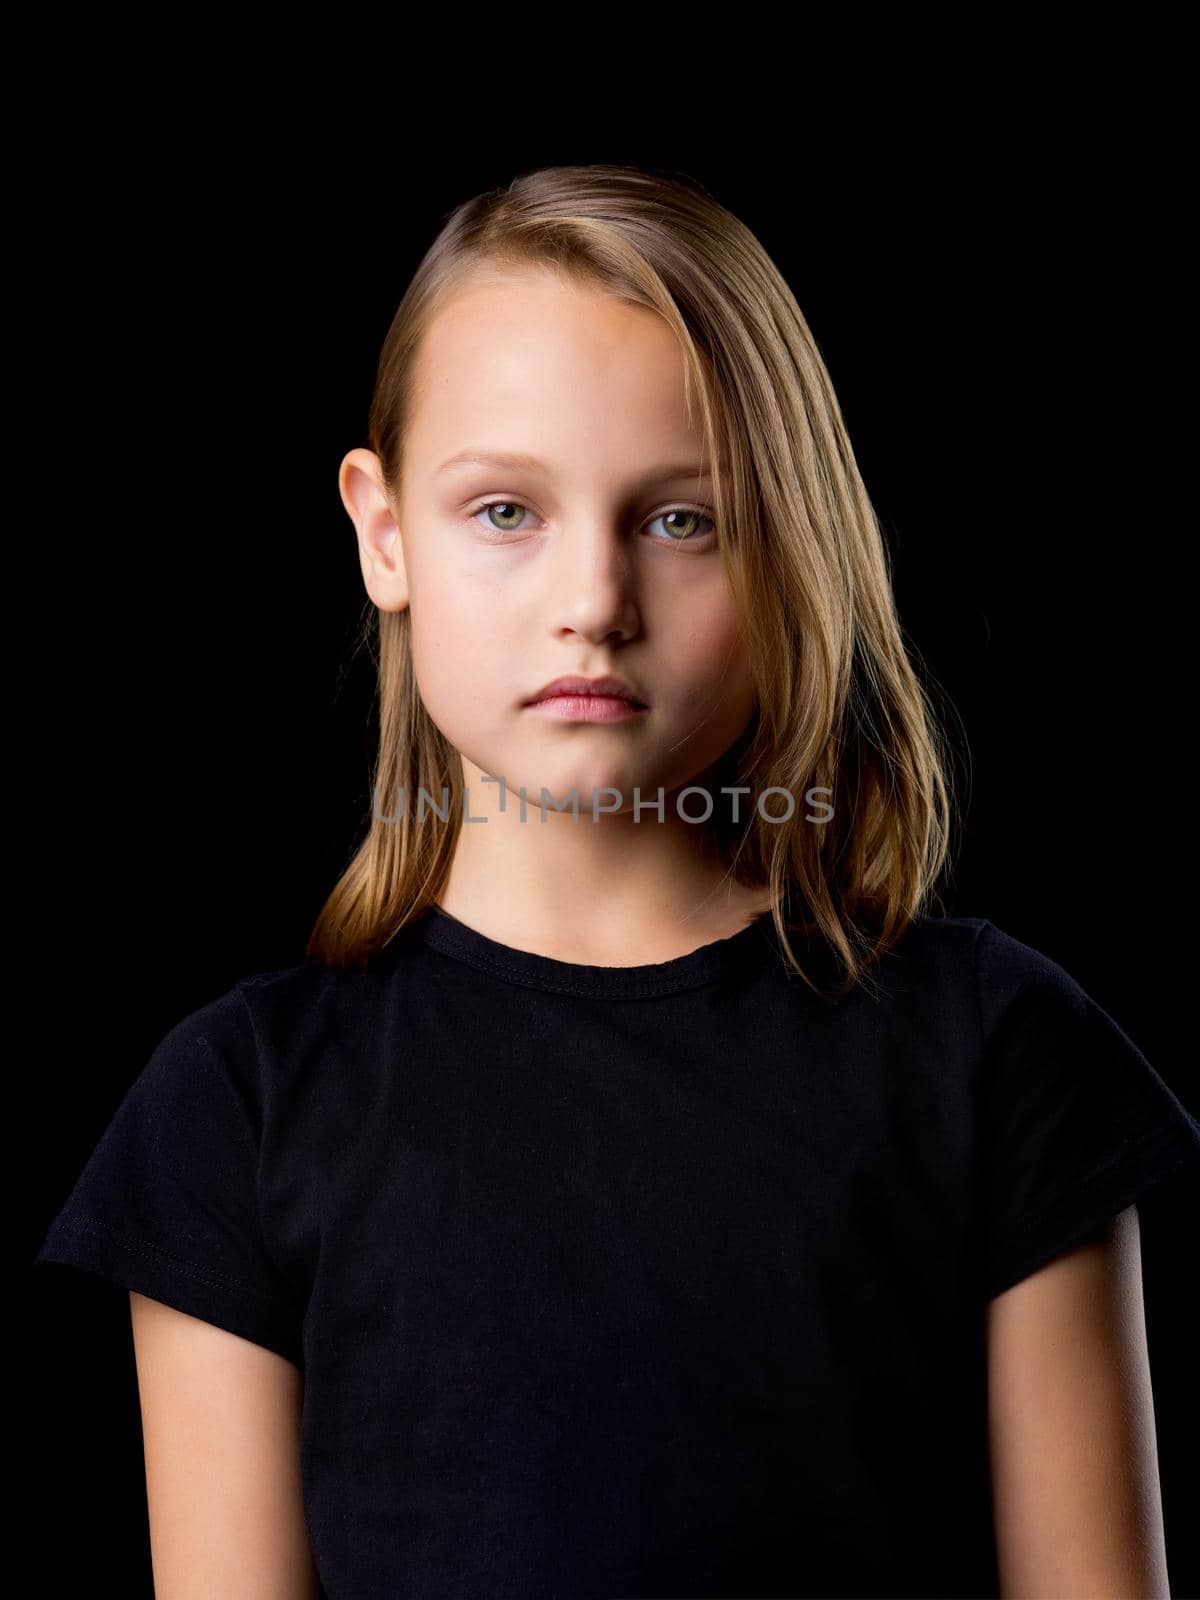 Beautiful girl posing in the studio. Close-up portrait of a beautiful blonde teenage girl in a black t-shirt on a black background.